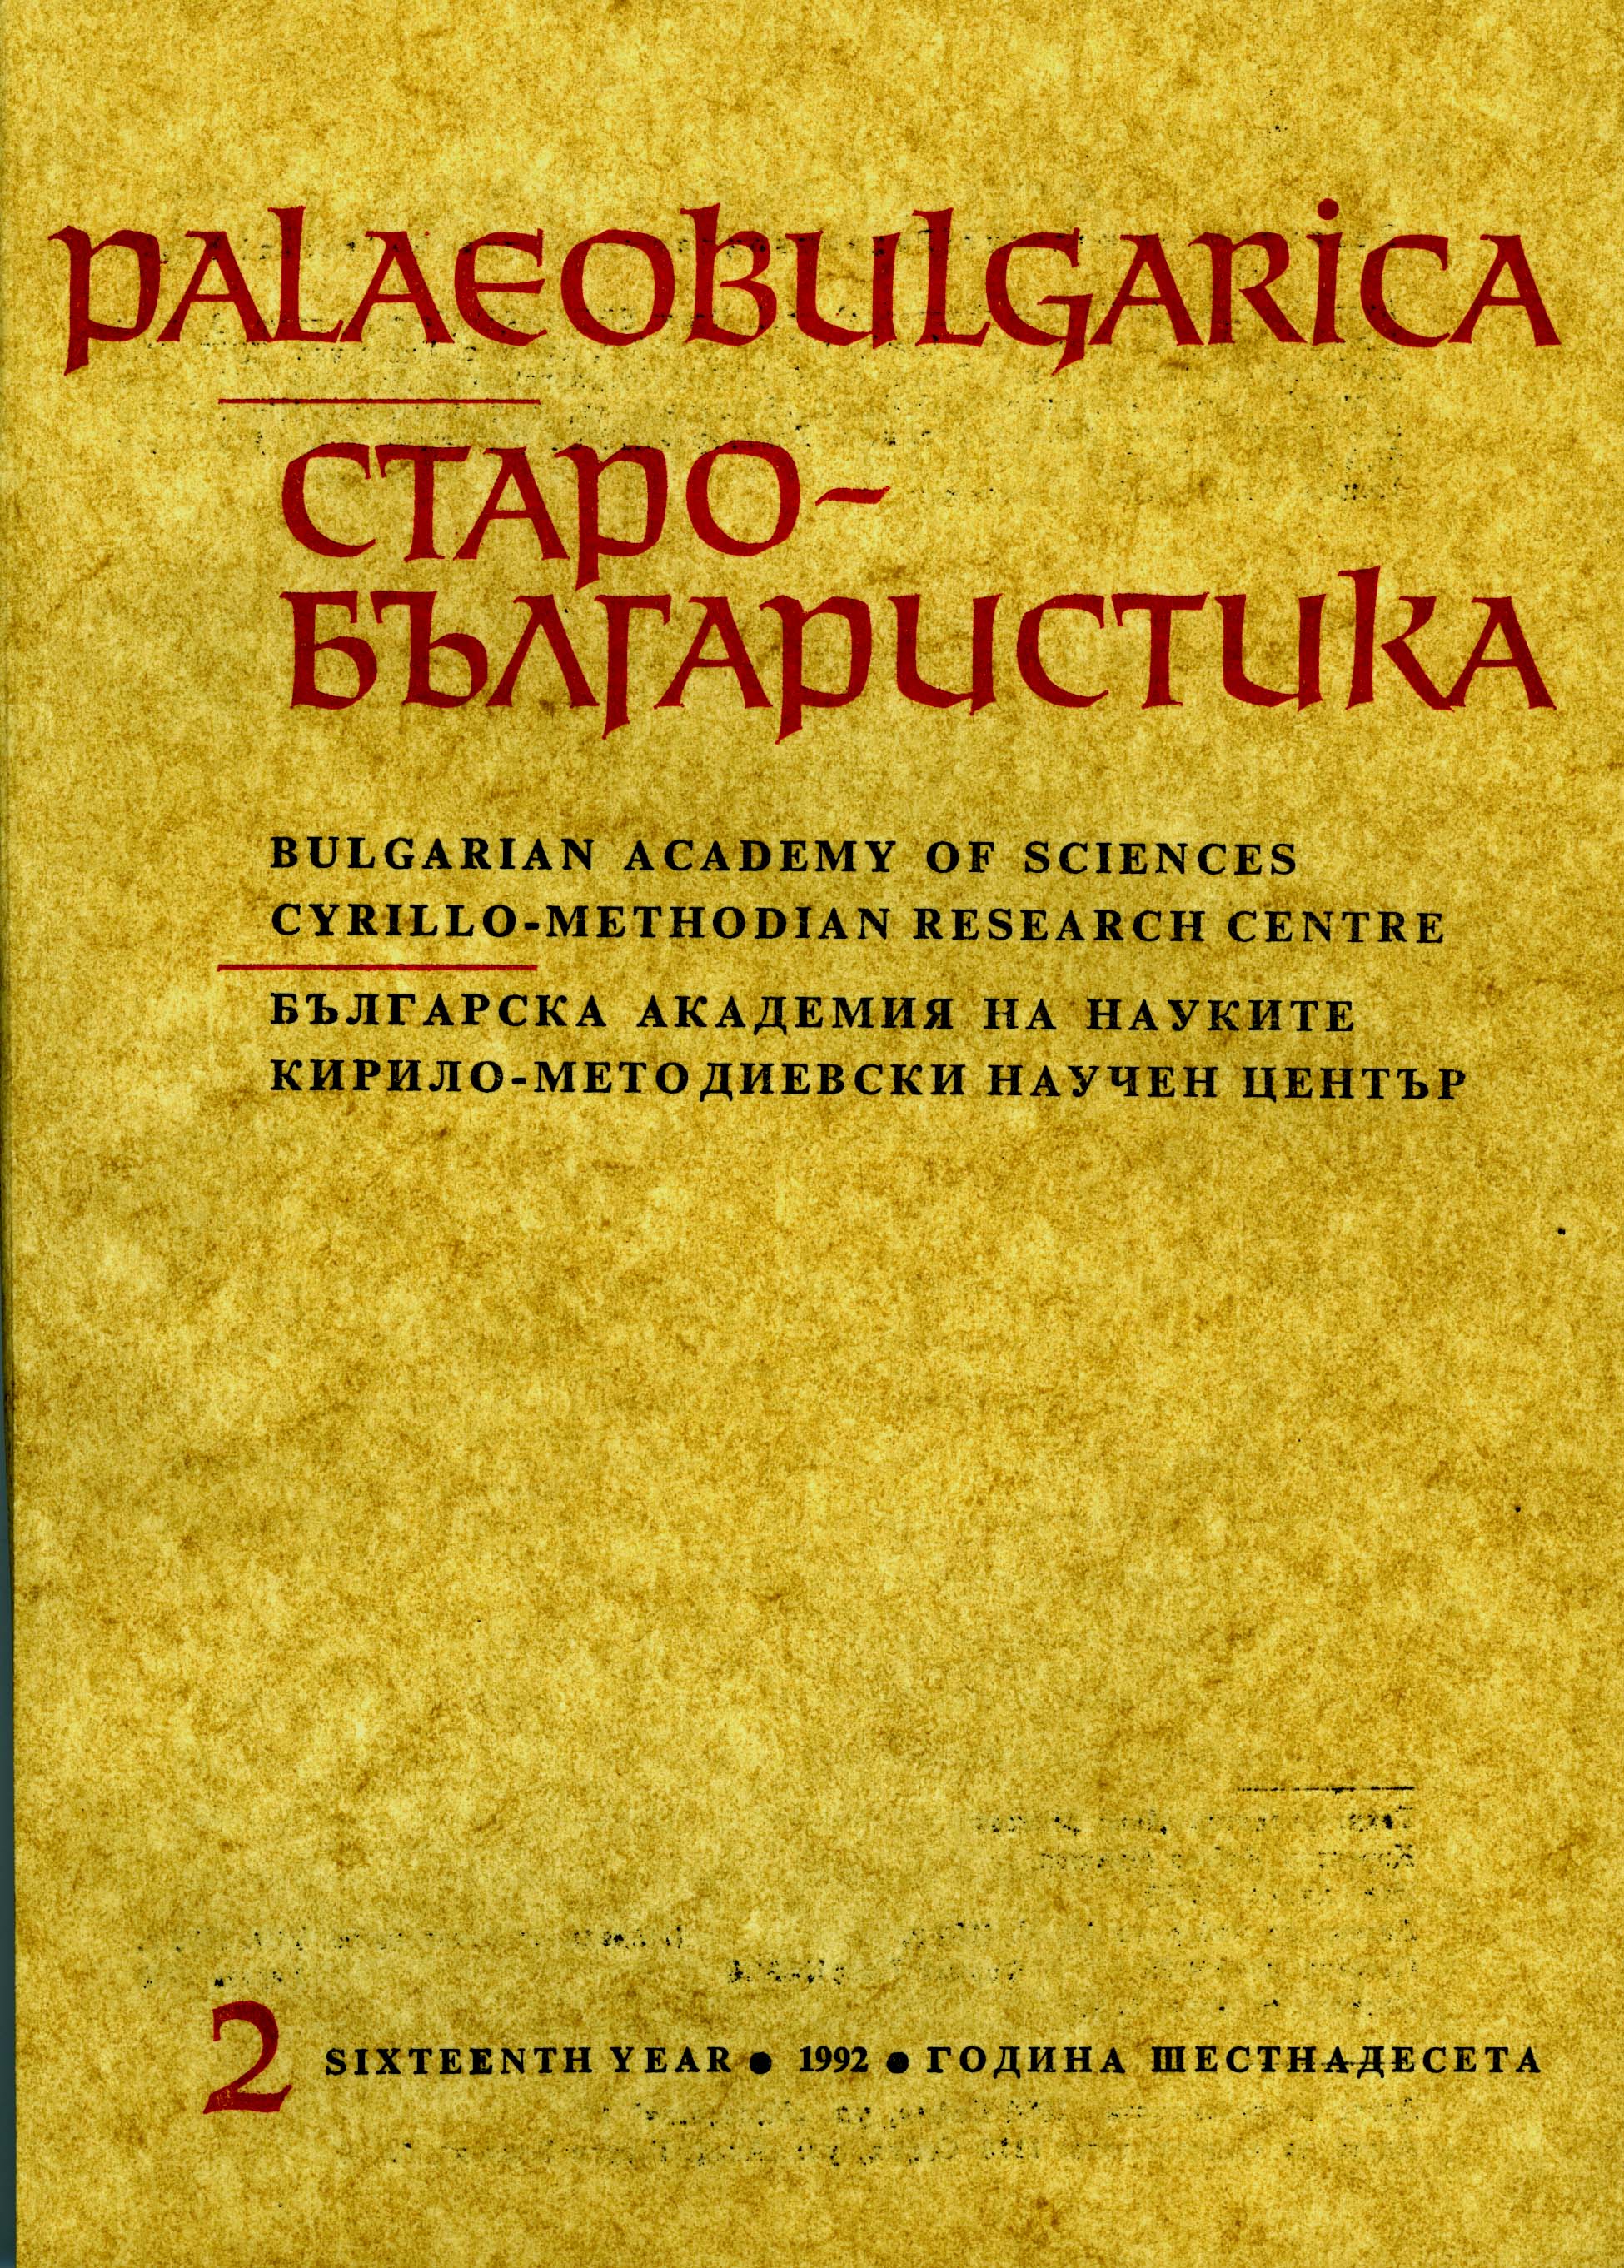 Old Ritualists Compilation on “Sermon Against the Heretics” by Presbyter Cosmas Cover Image